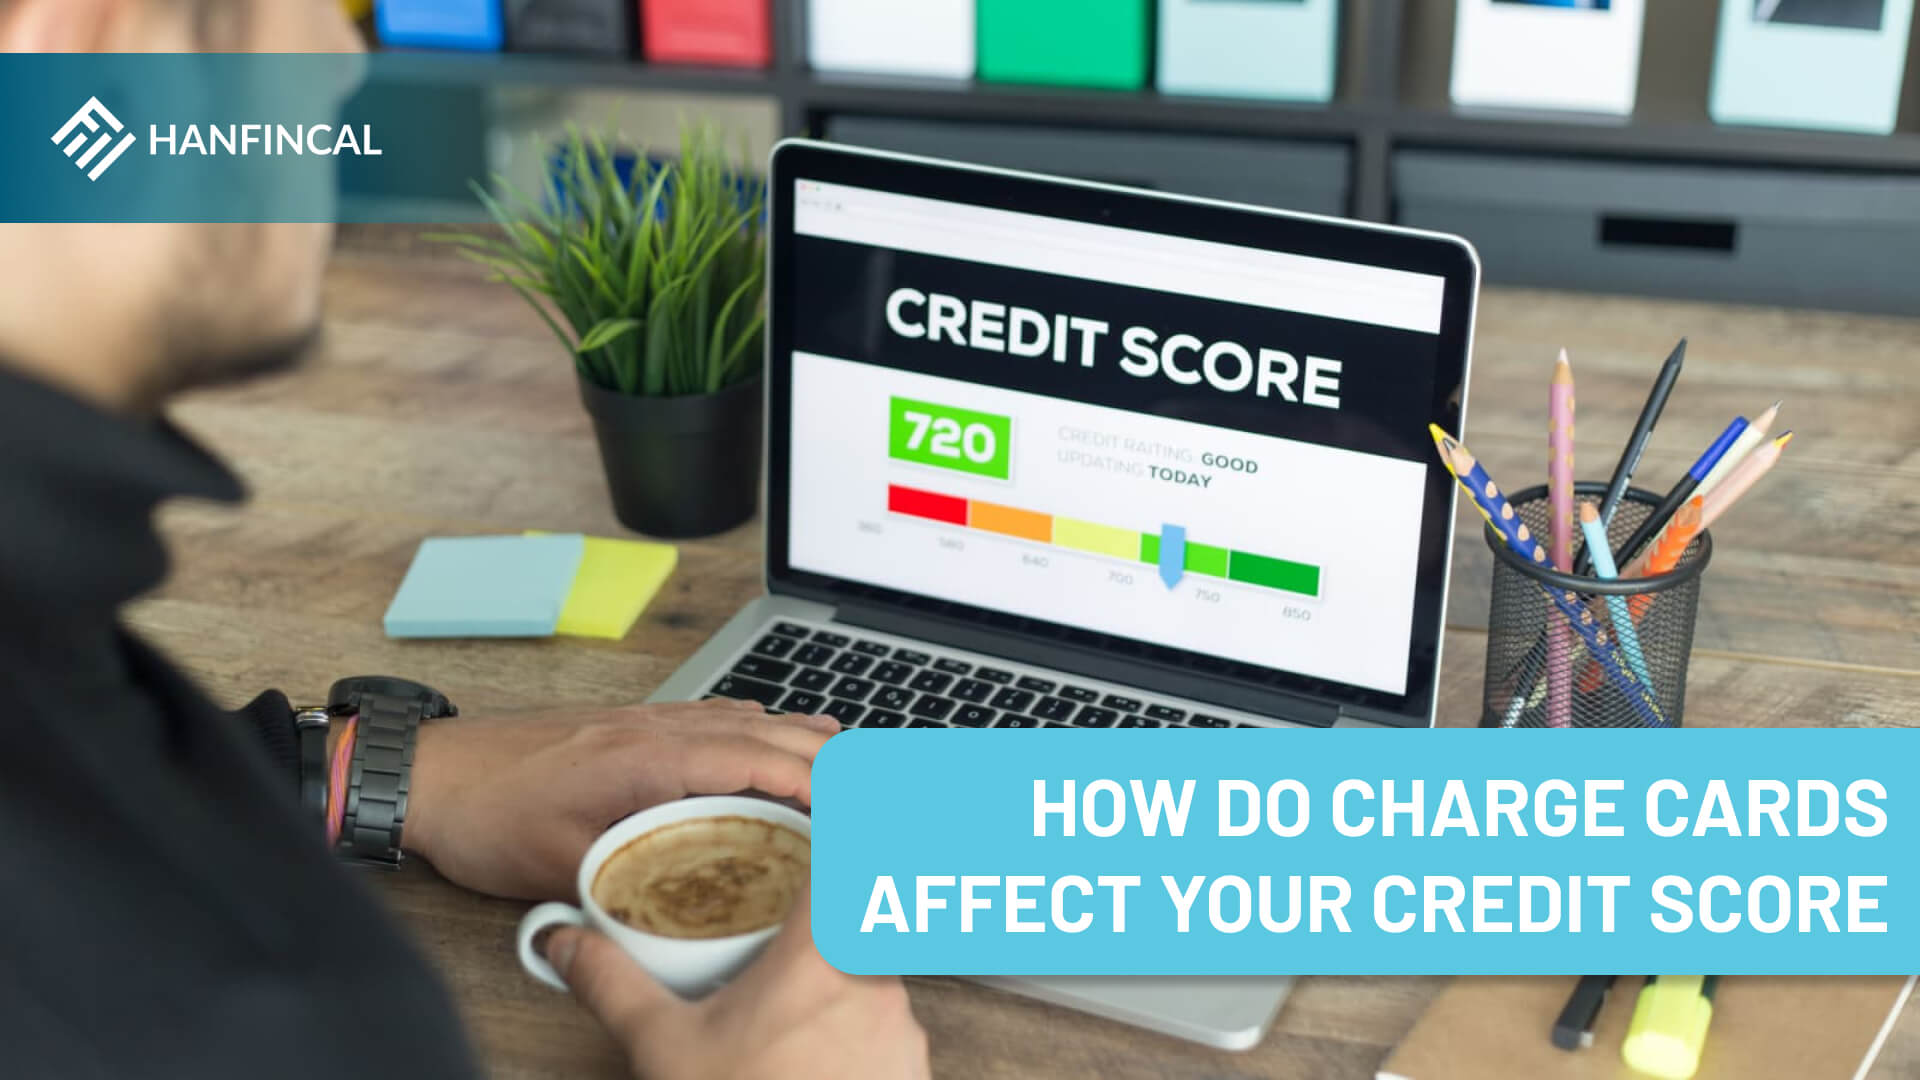 How do charge cards affect your credit score?